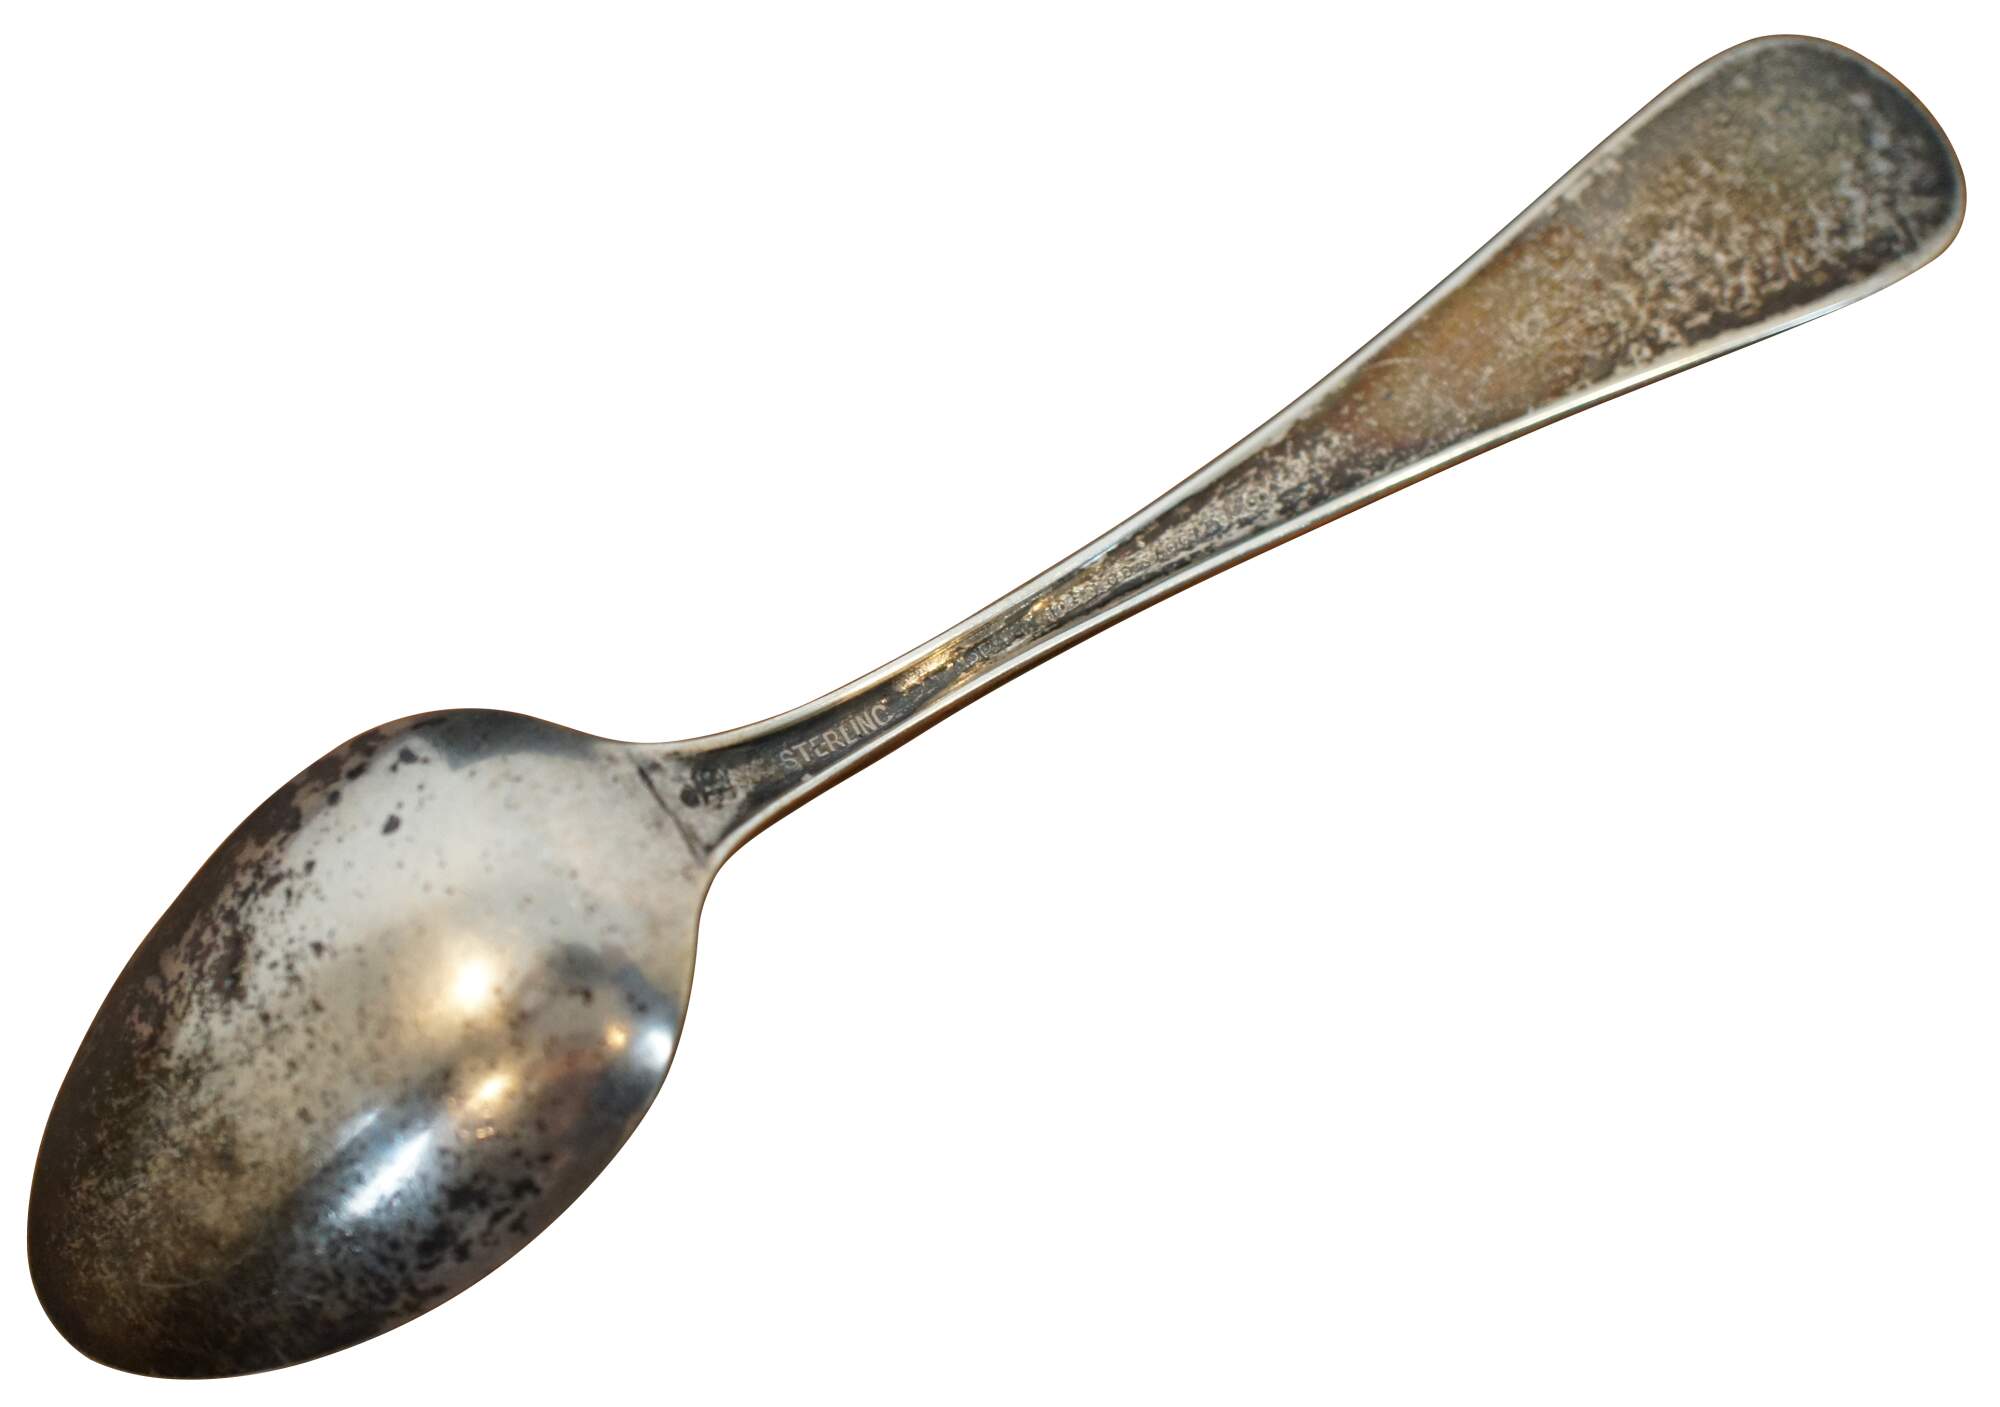 Sterling Silver Spoons Louis XV Pattern by Whiting